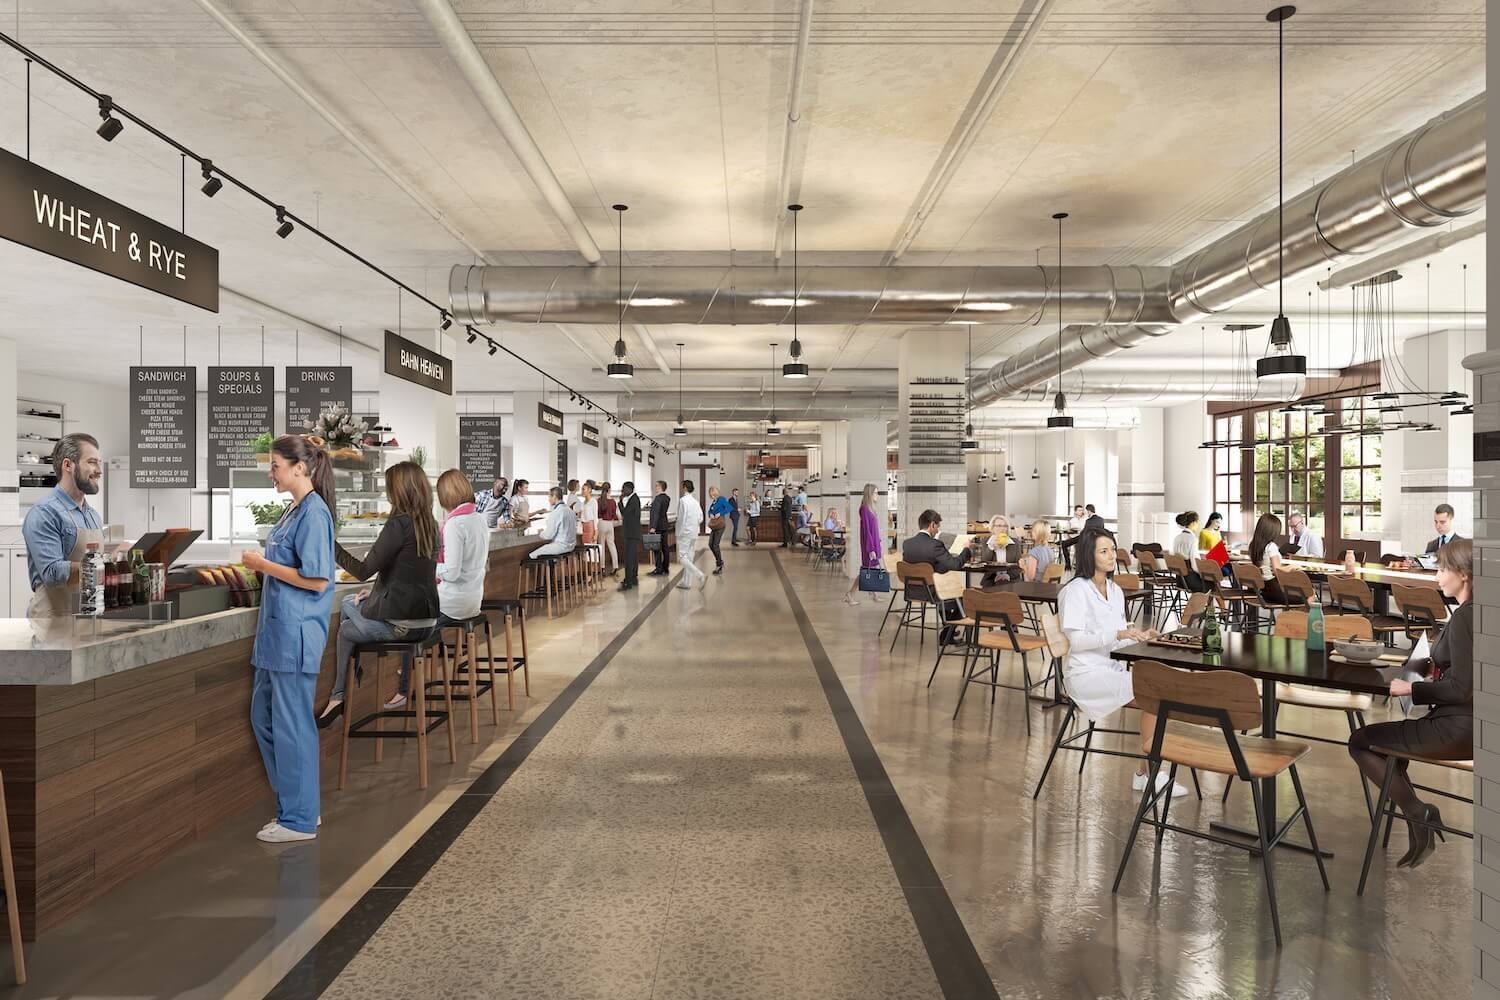 An open space food hall with dining tables on one side and restaurants with bar stools on the other. July 2020